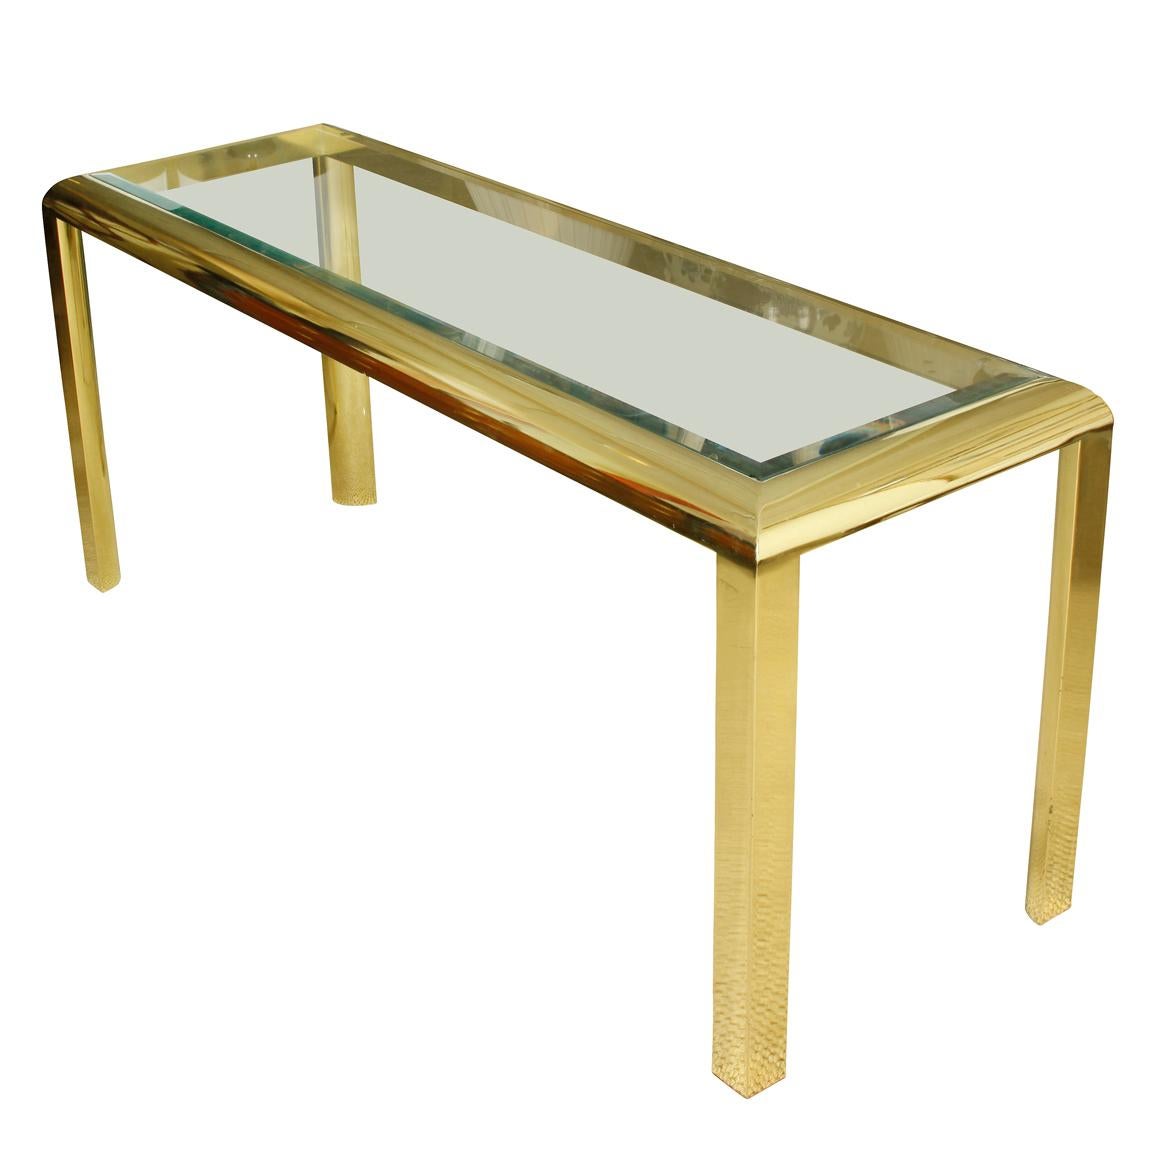 A contemporary styled sleek gold tone console table with glass top. A vintage table with a streamlined, modern look.